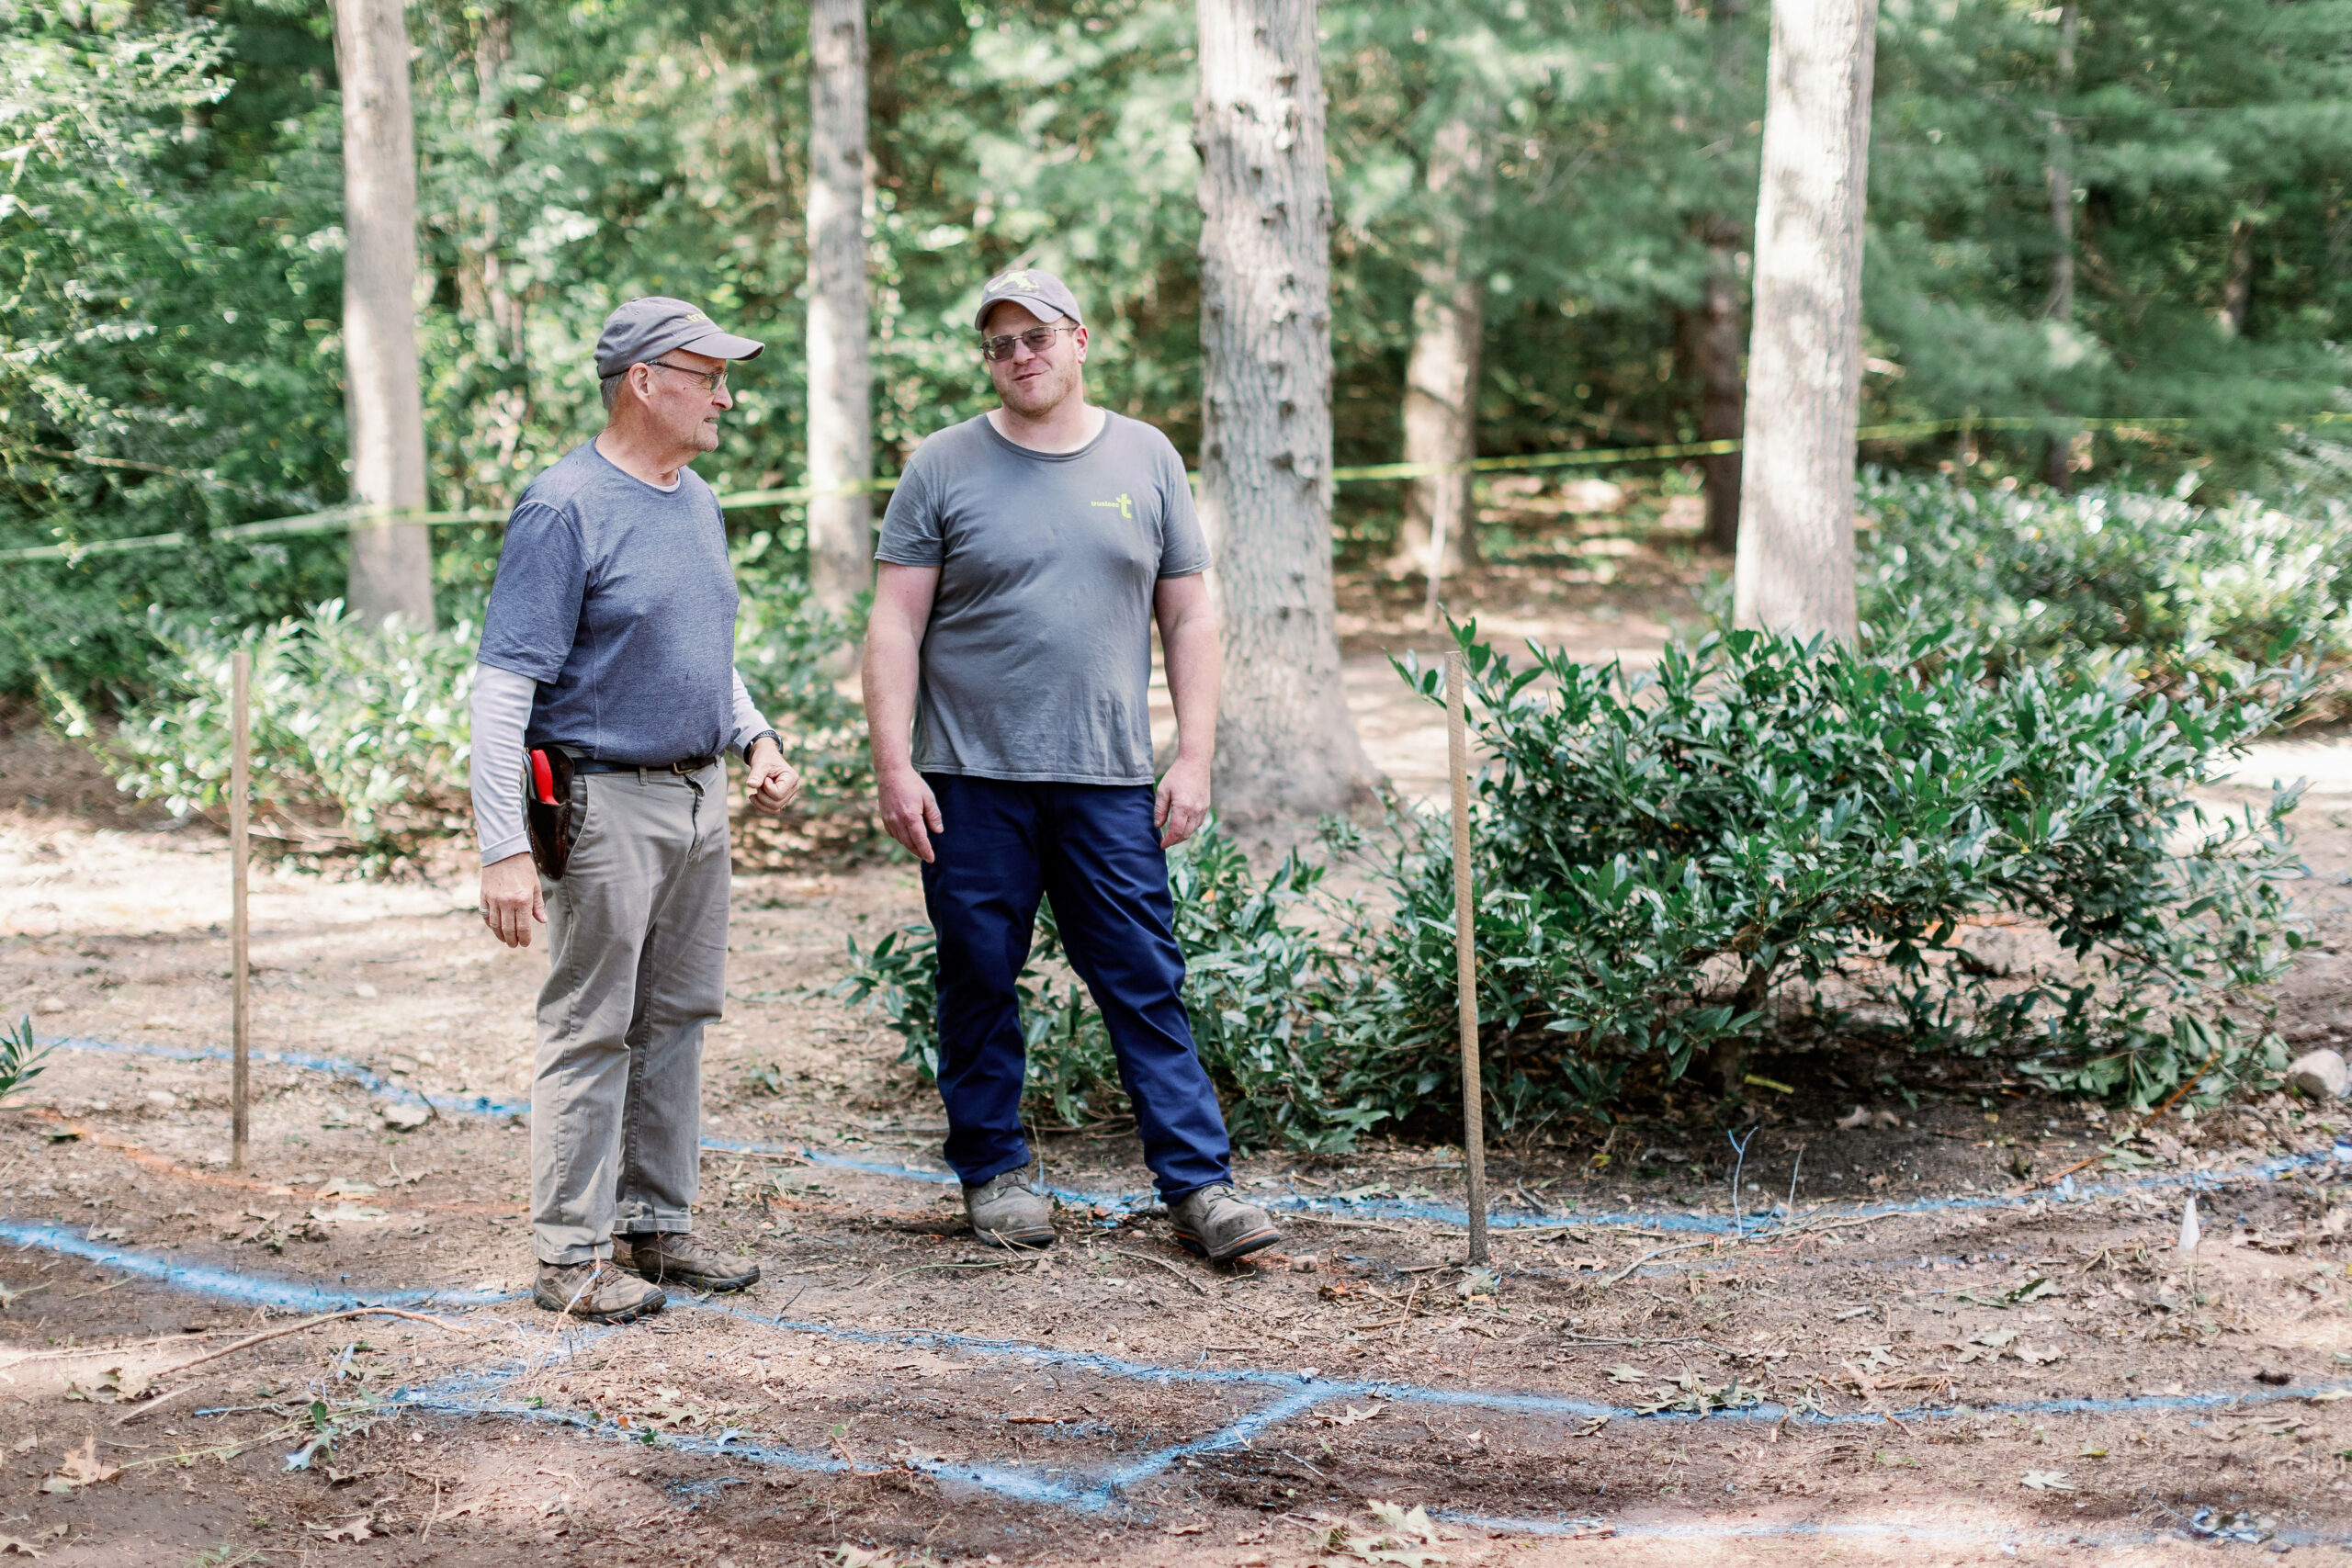 Two men stand talking in a forest area